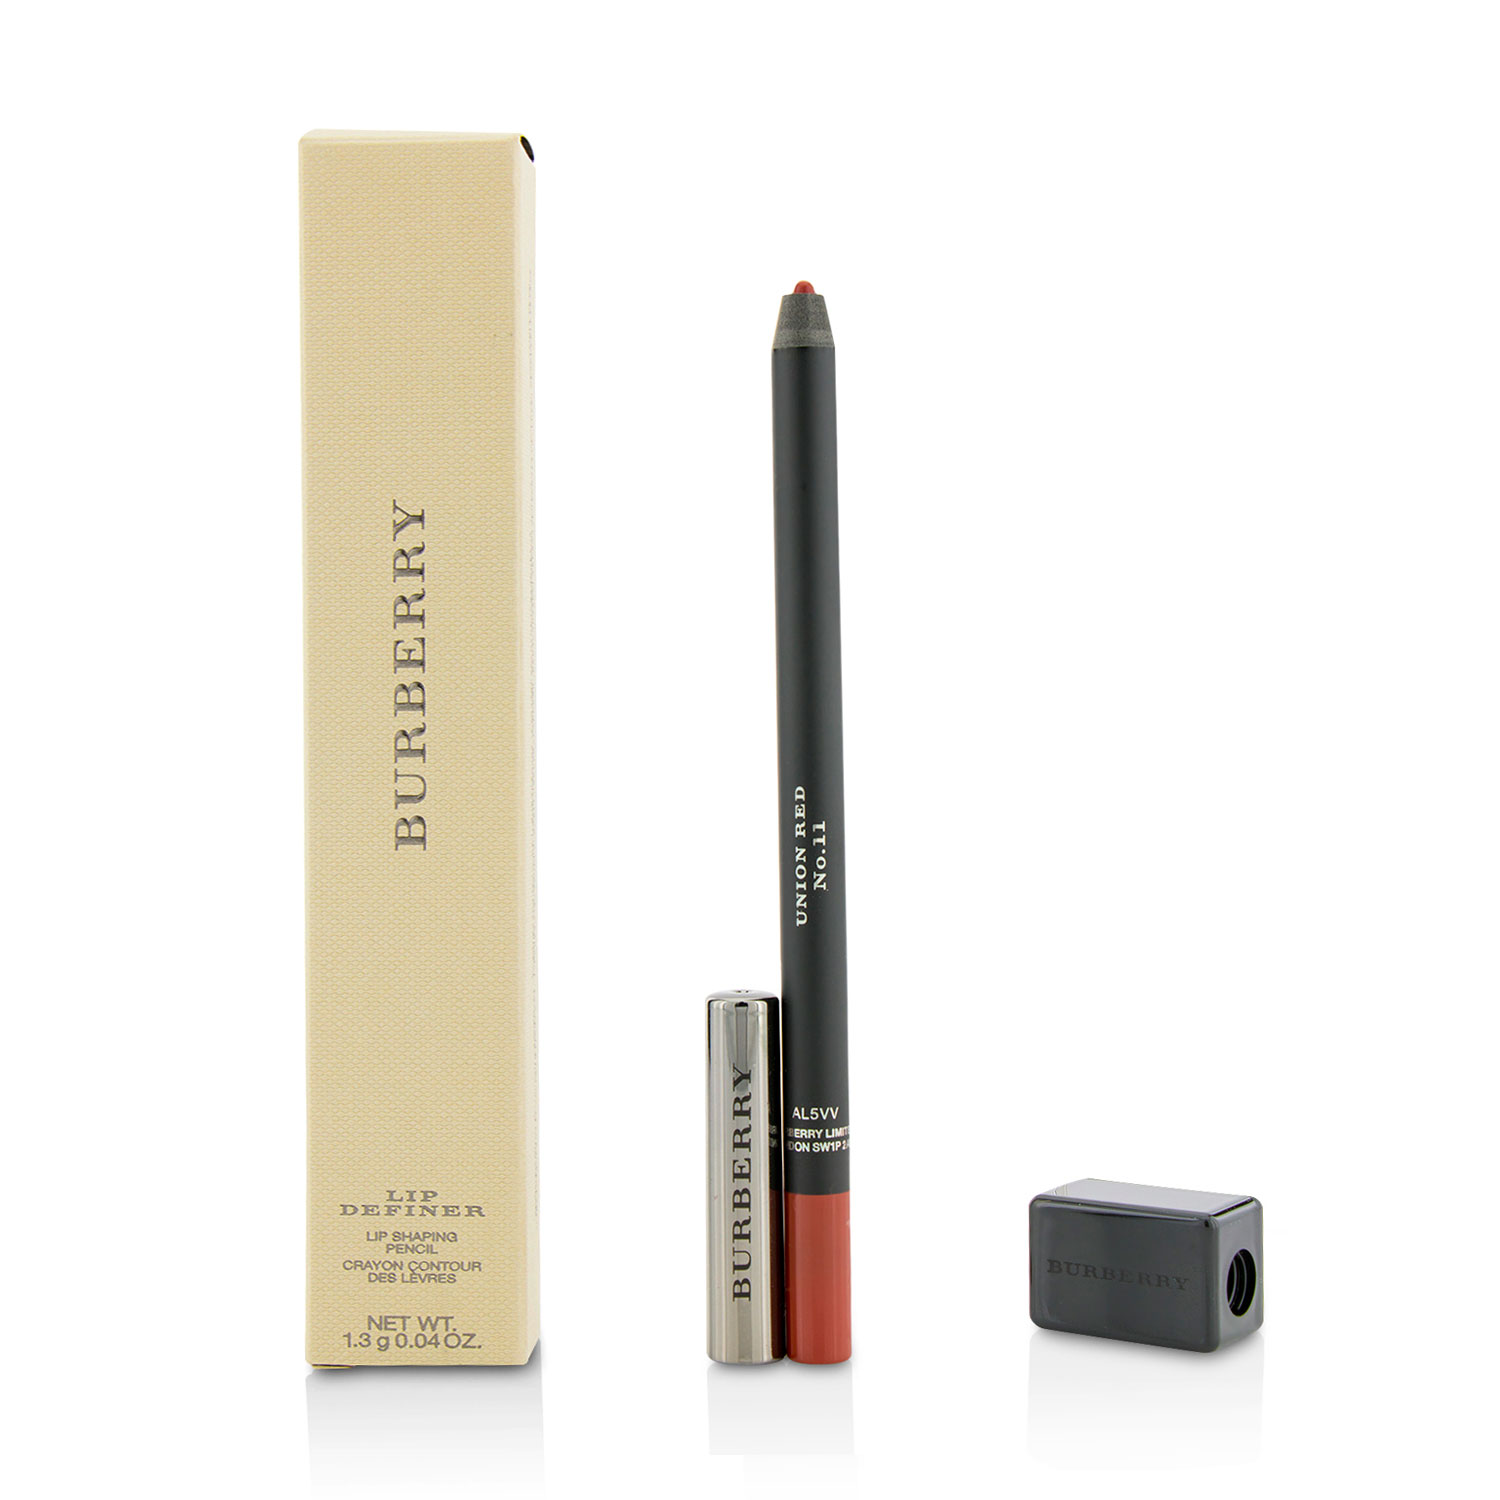 Lip Definer Lip Shaping Pencil With Sharpener - # No. 11 Union Red Burberry Image